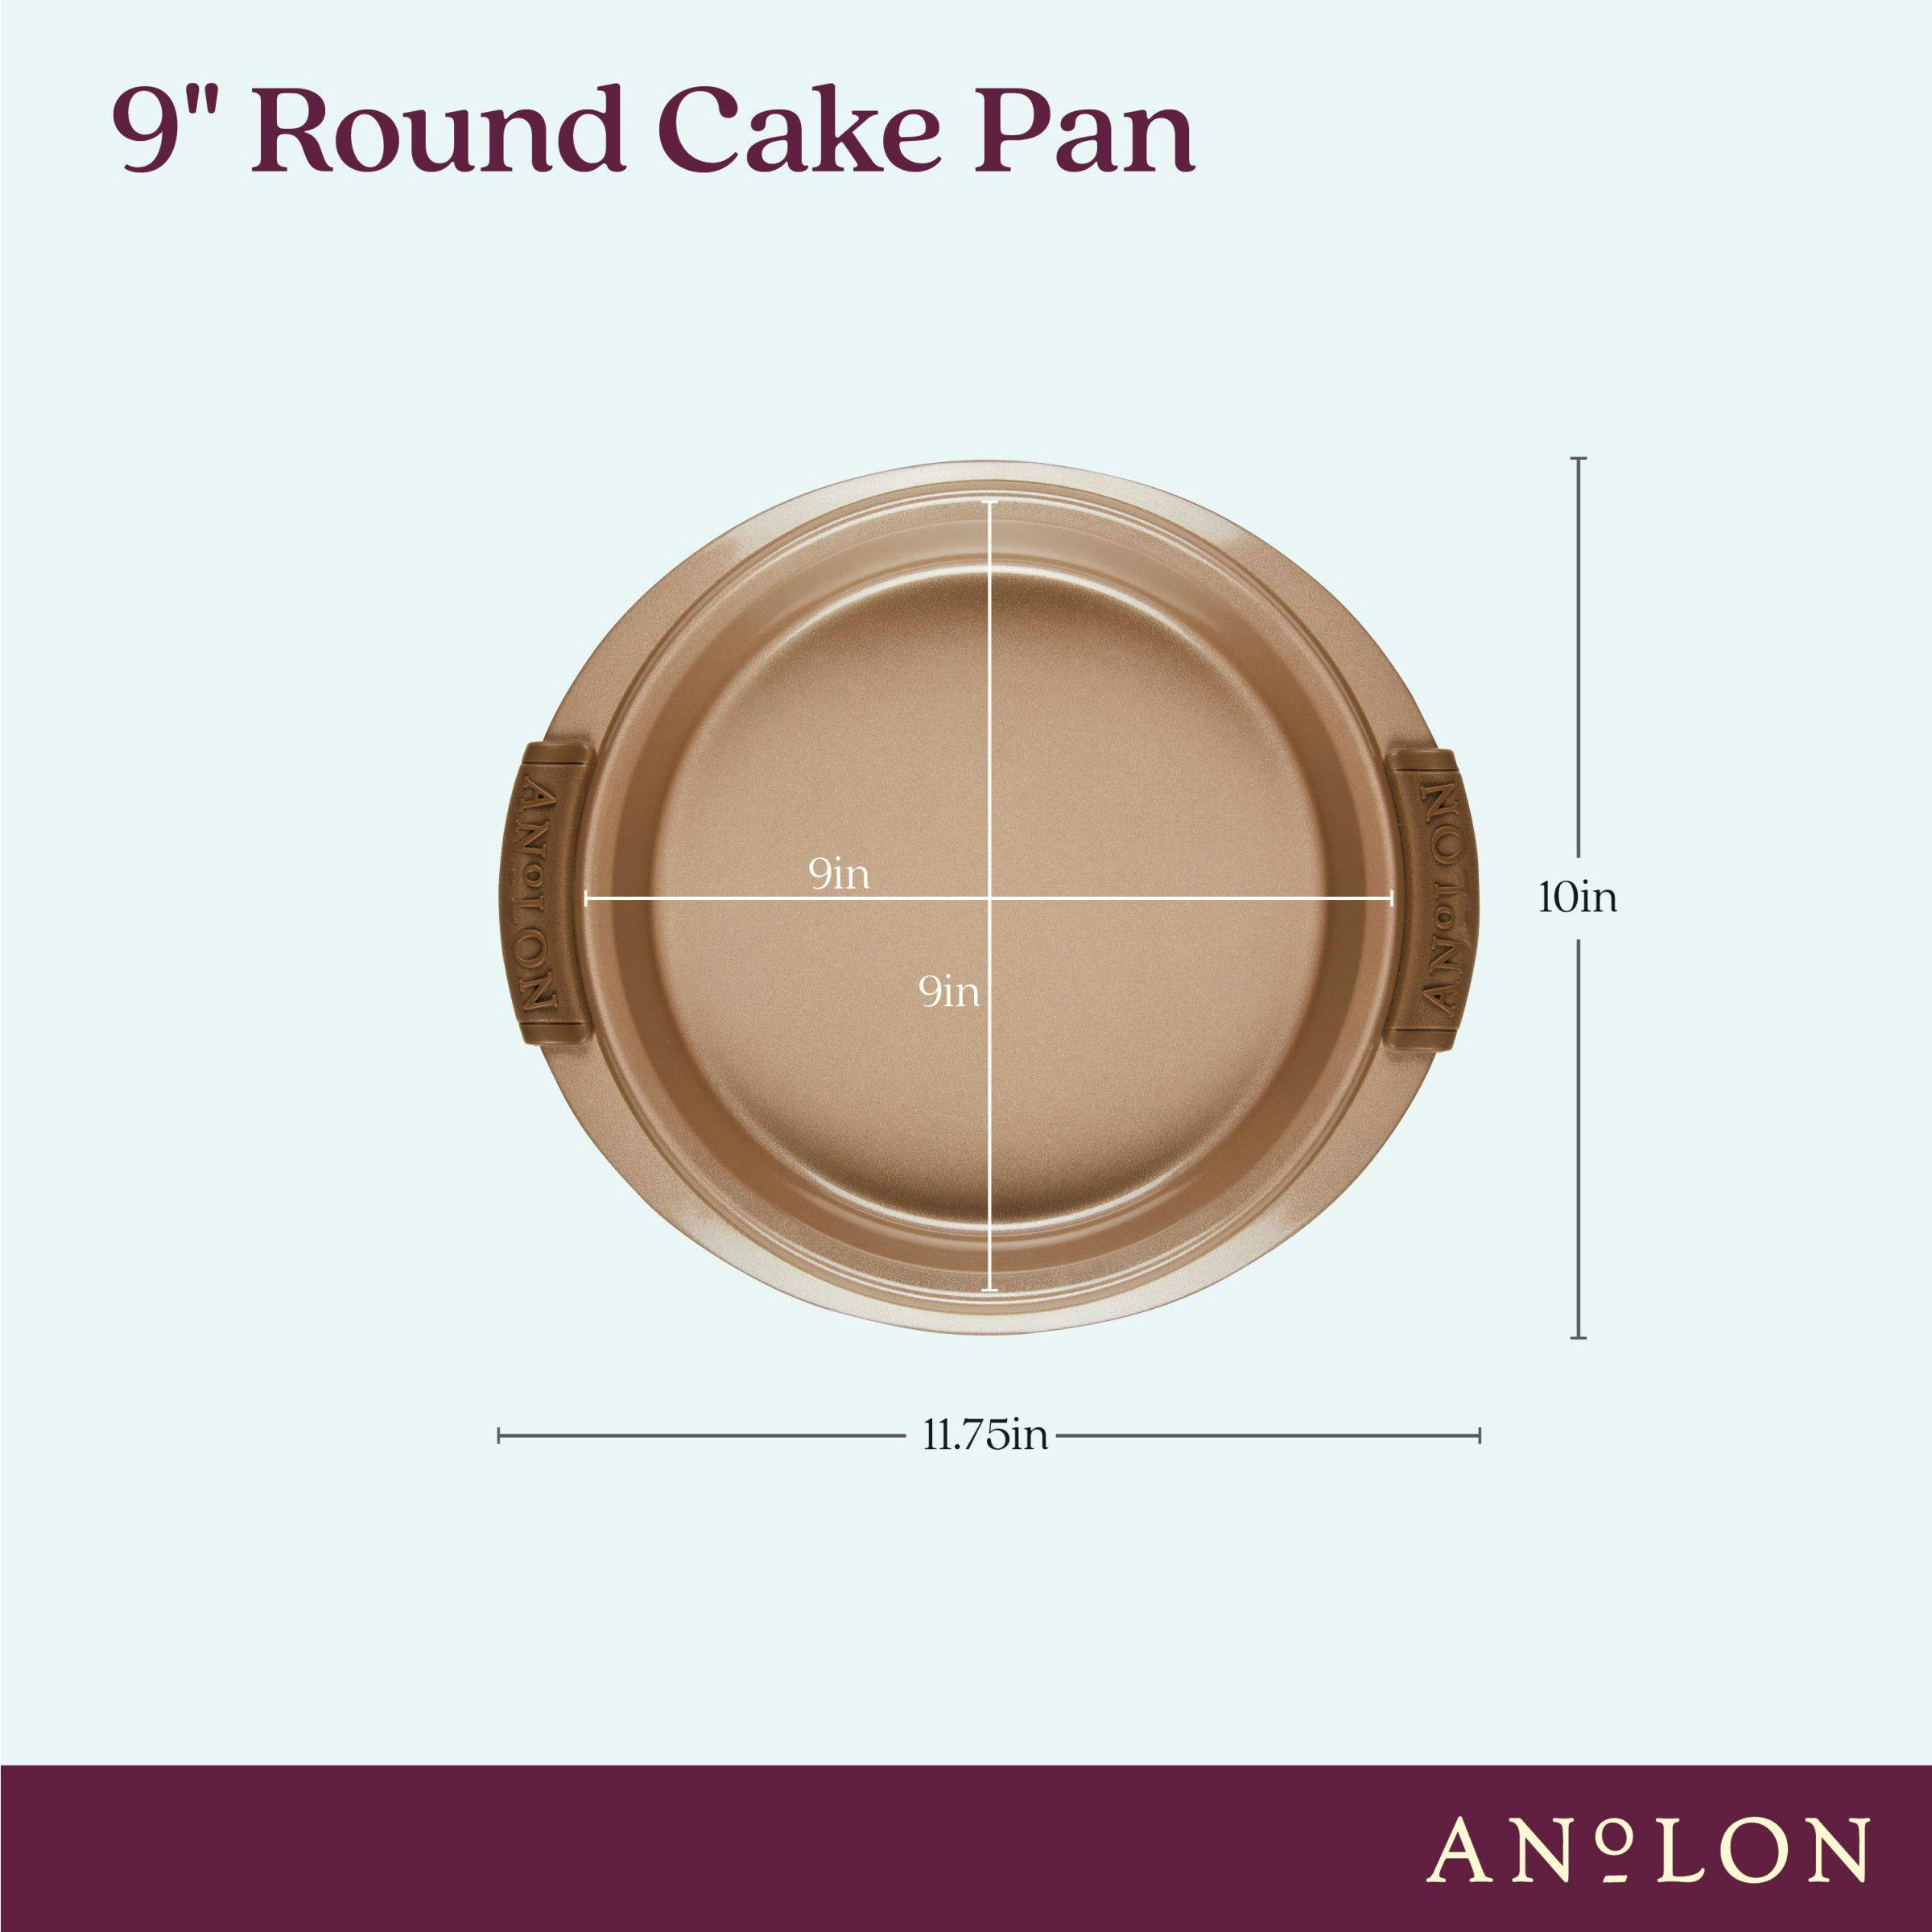 Anolon Advanced Bakeware 9-Inch Round Cake Pan with Silicone Grips, Bronze